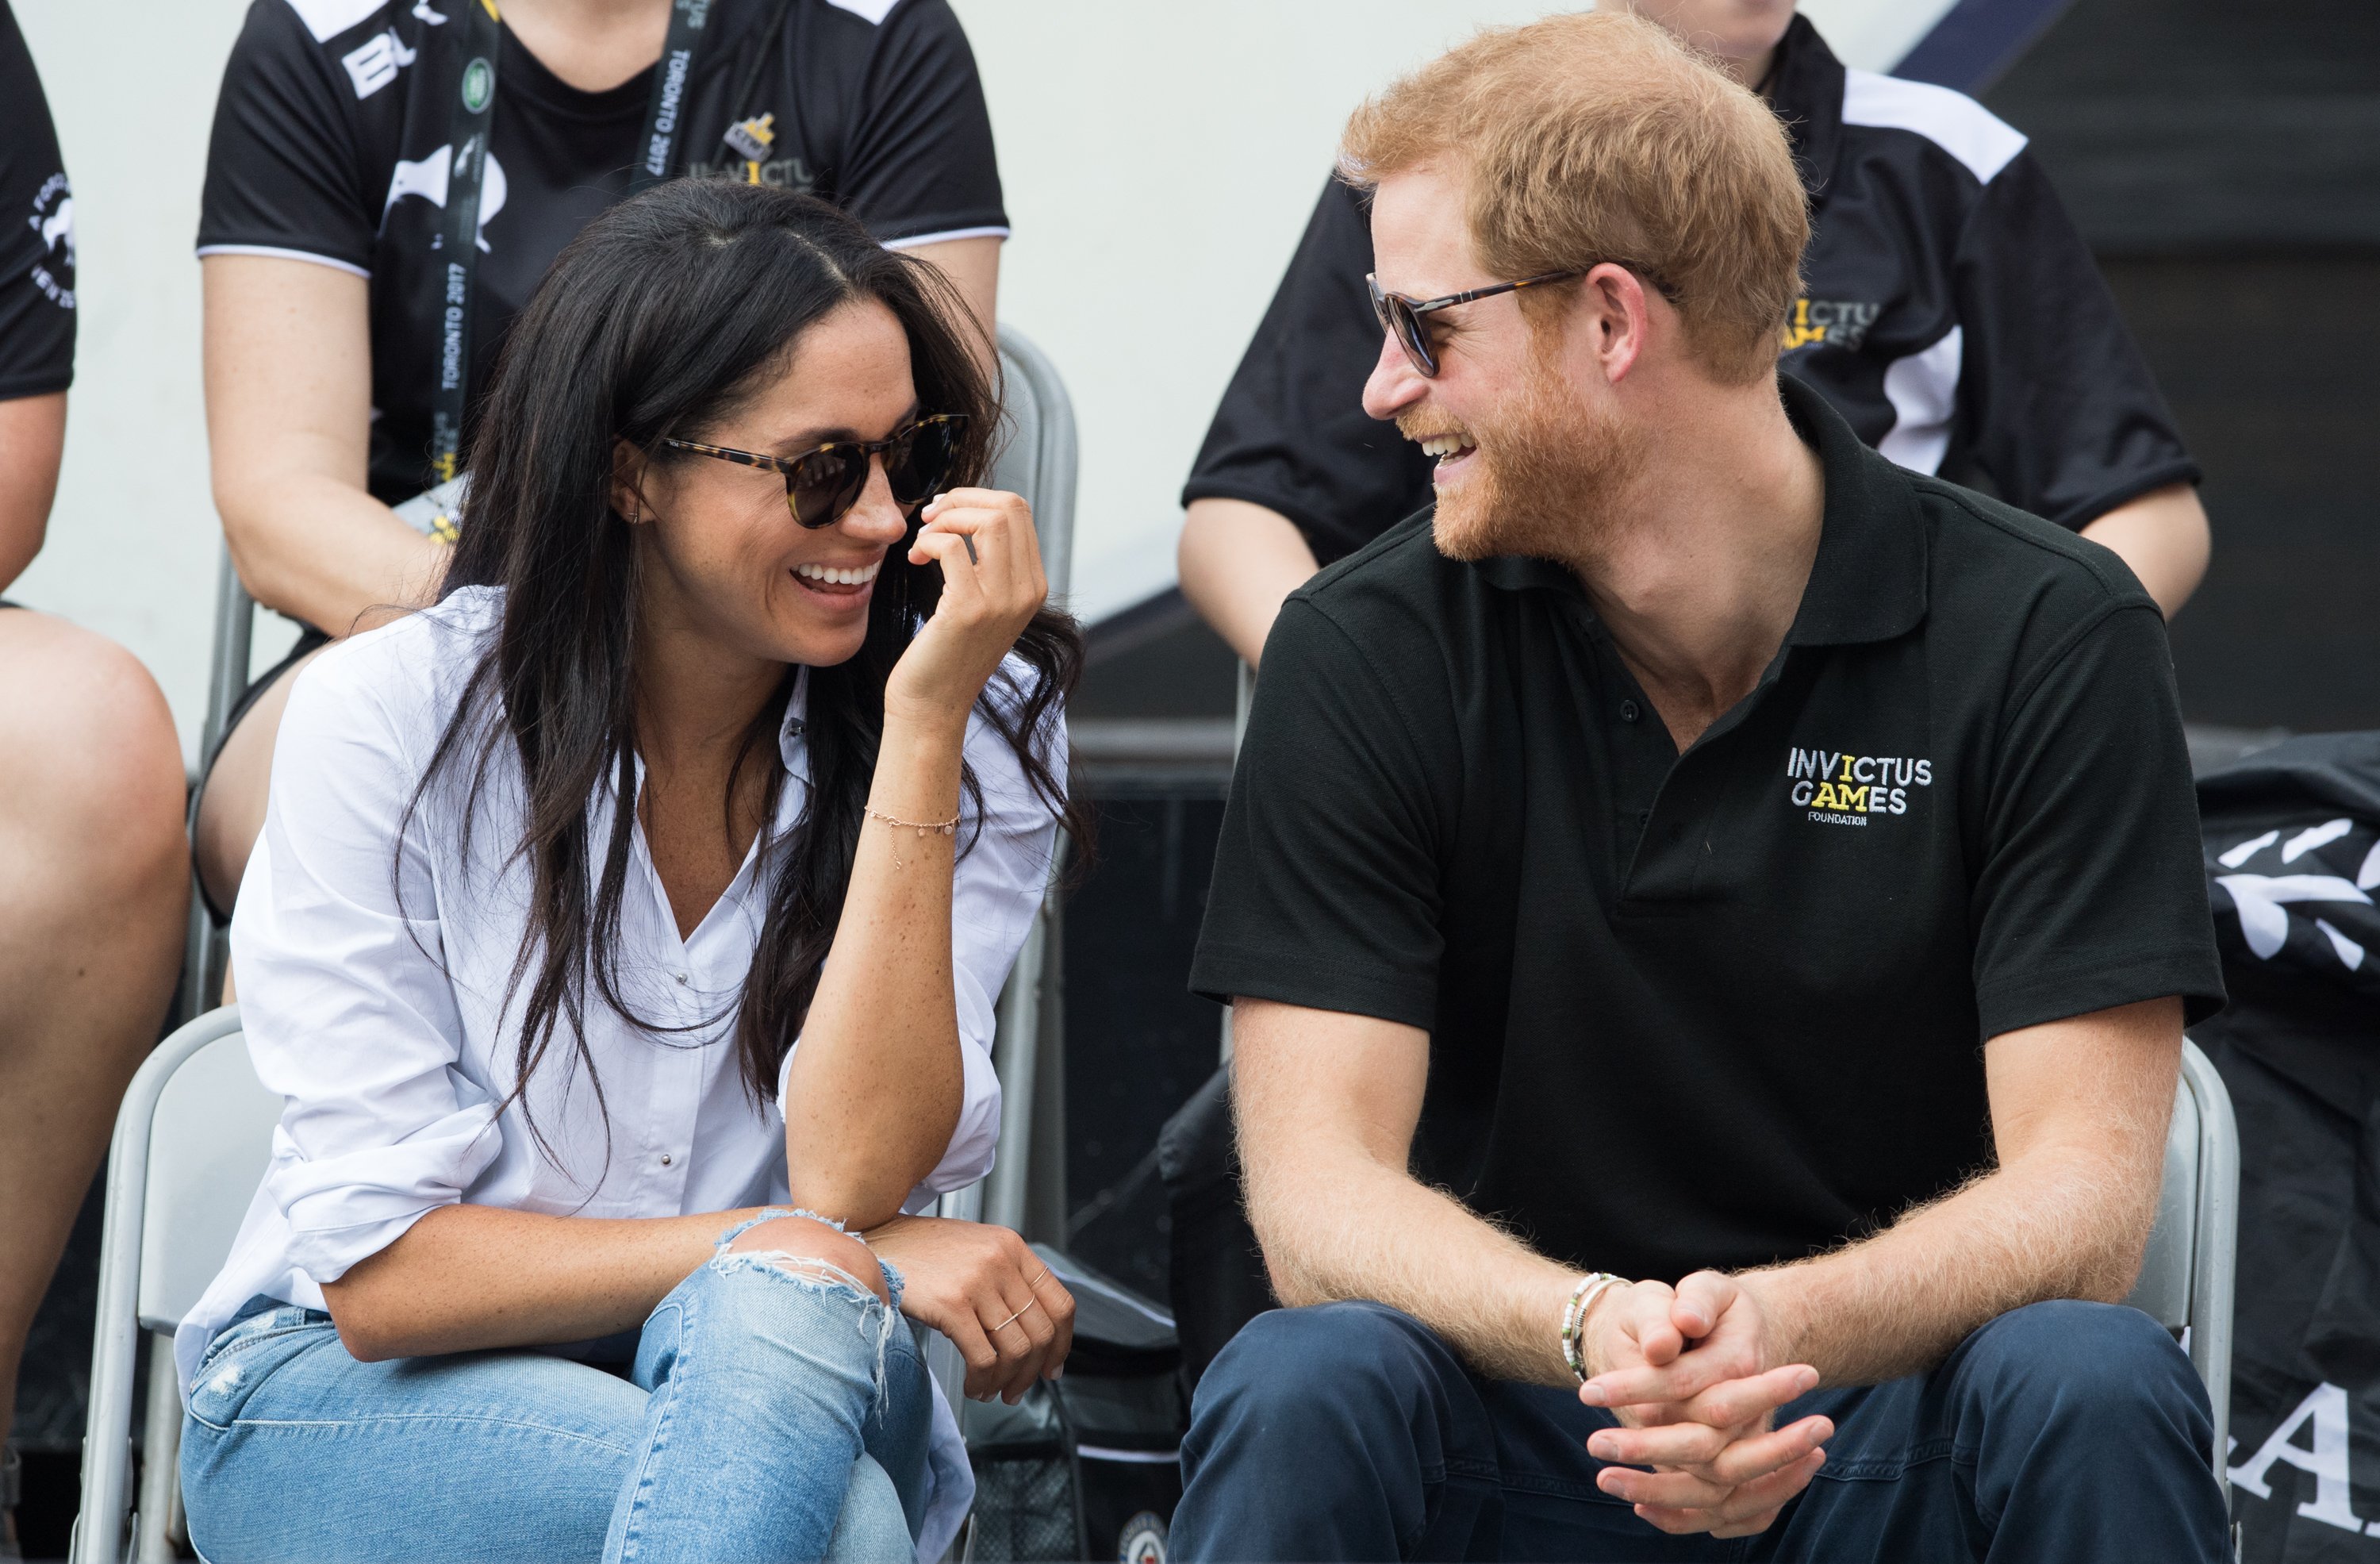 Meghan Markle and Prince Harry attending wheelchair tennis on day 3 of the Invictus Games Toronto 2017 on September 25, 2017 in Toronto, Canada. | Source: Getty Images